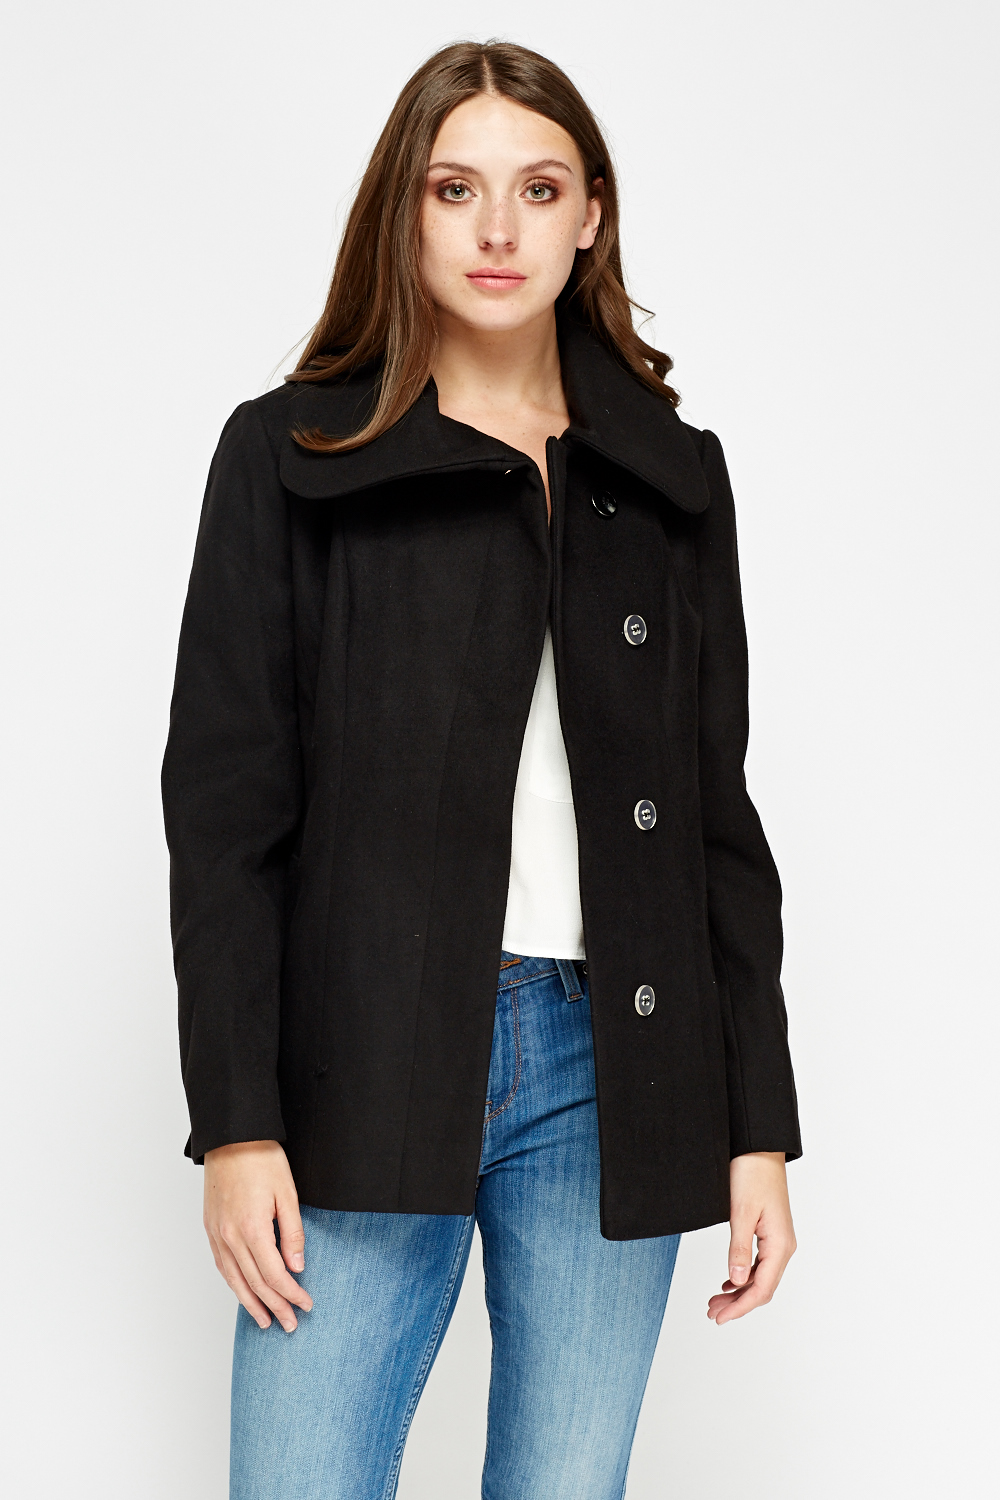 Black Fitted Casual Coat - Just $7